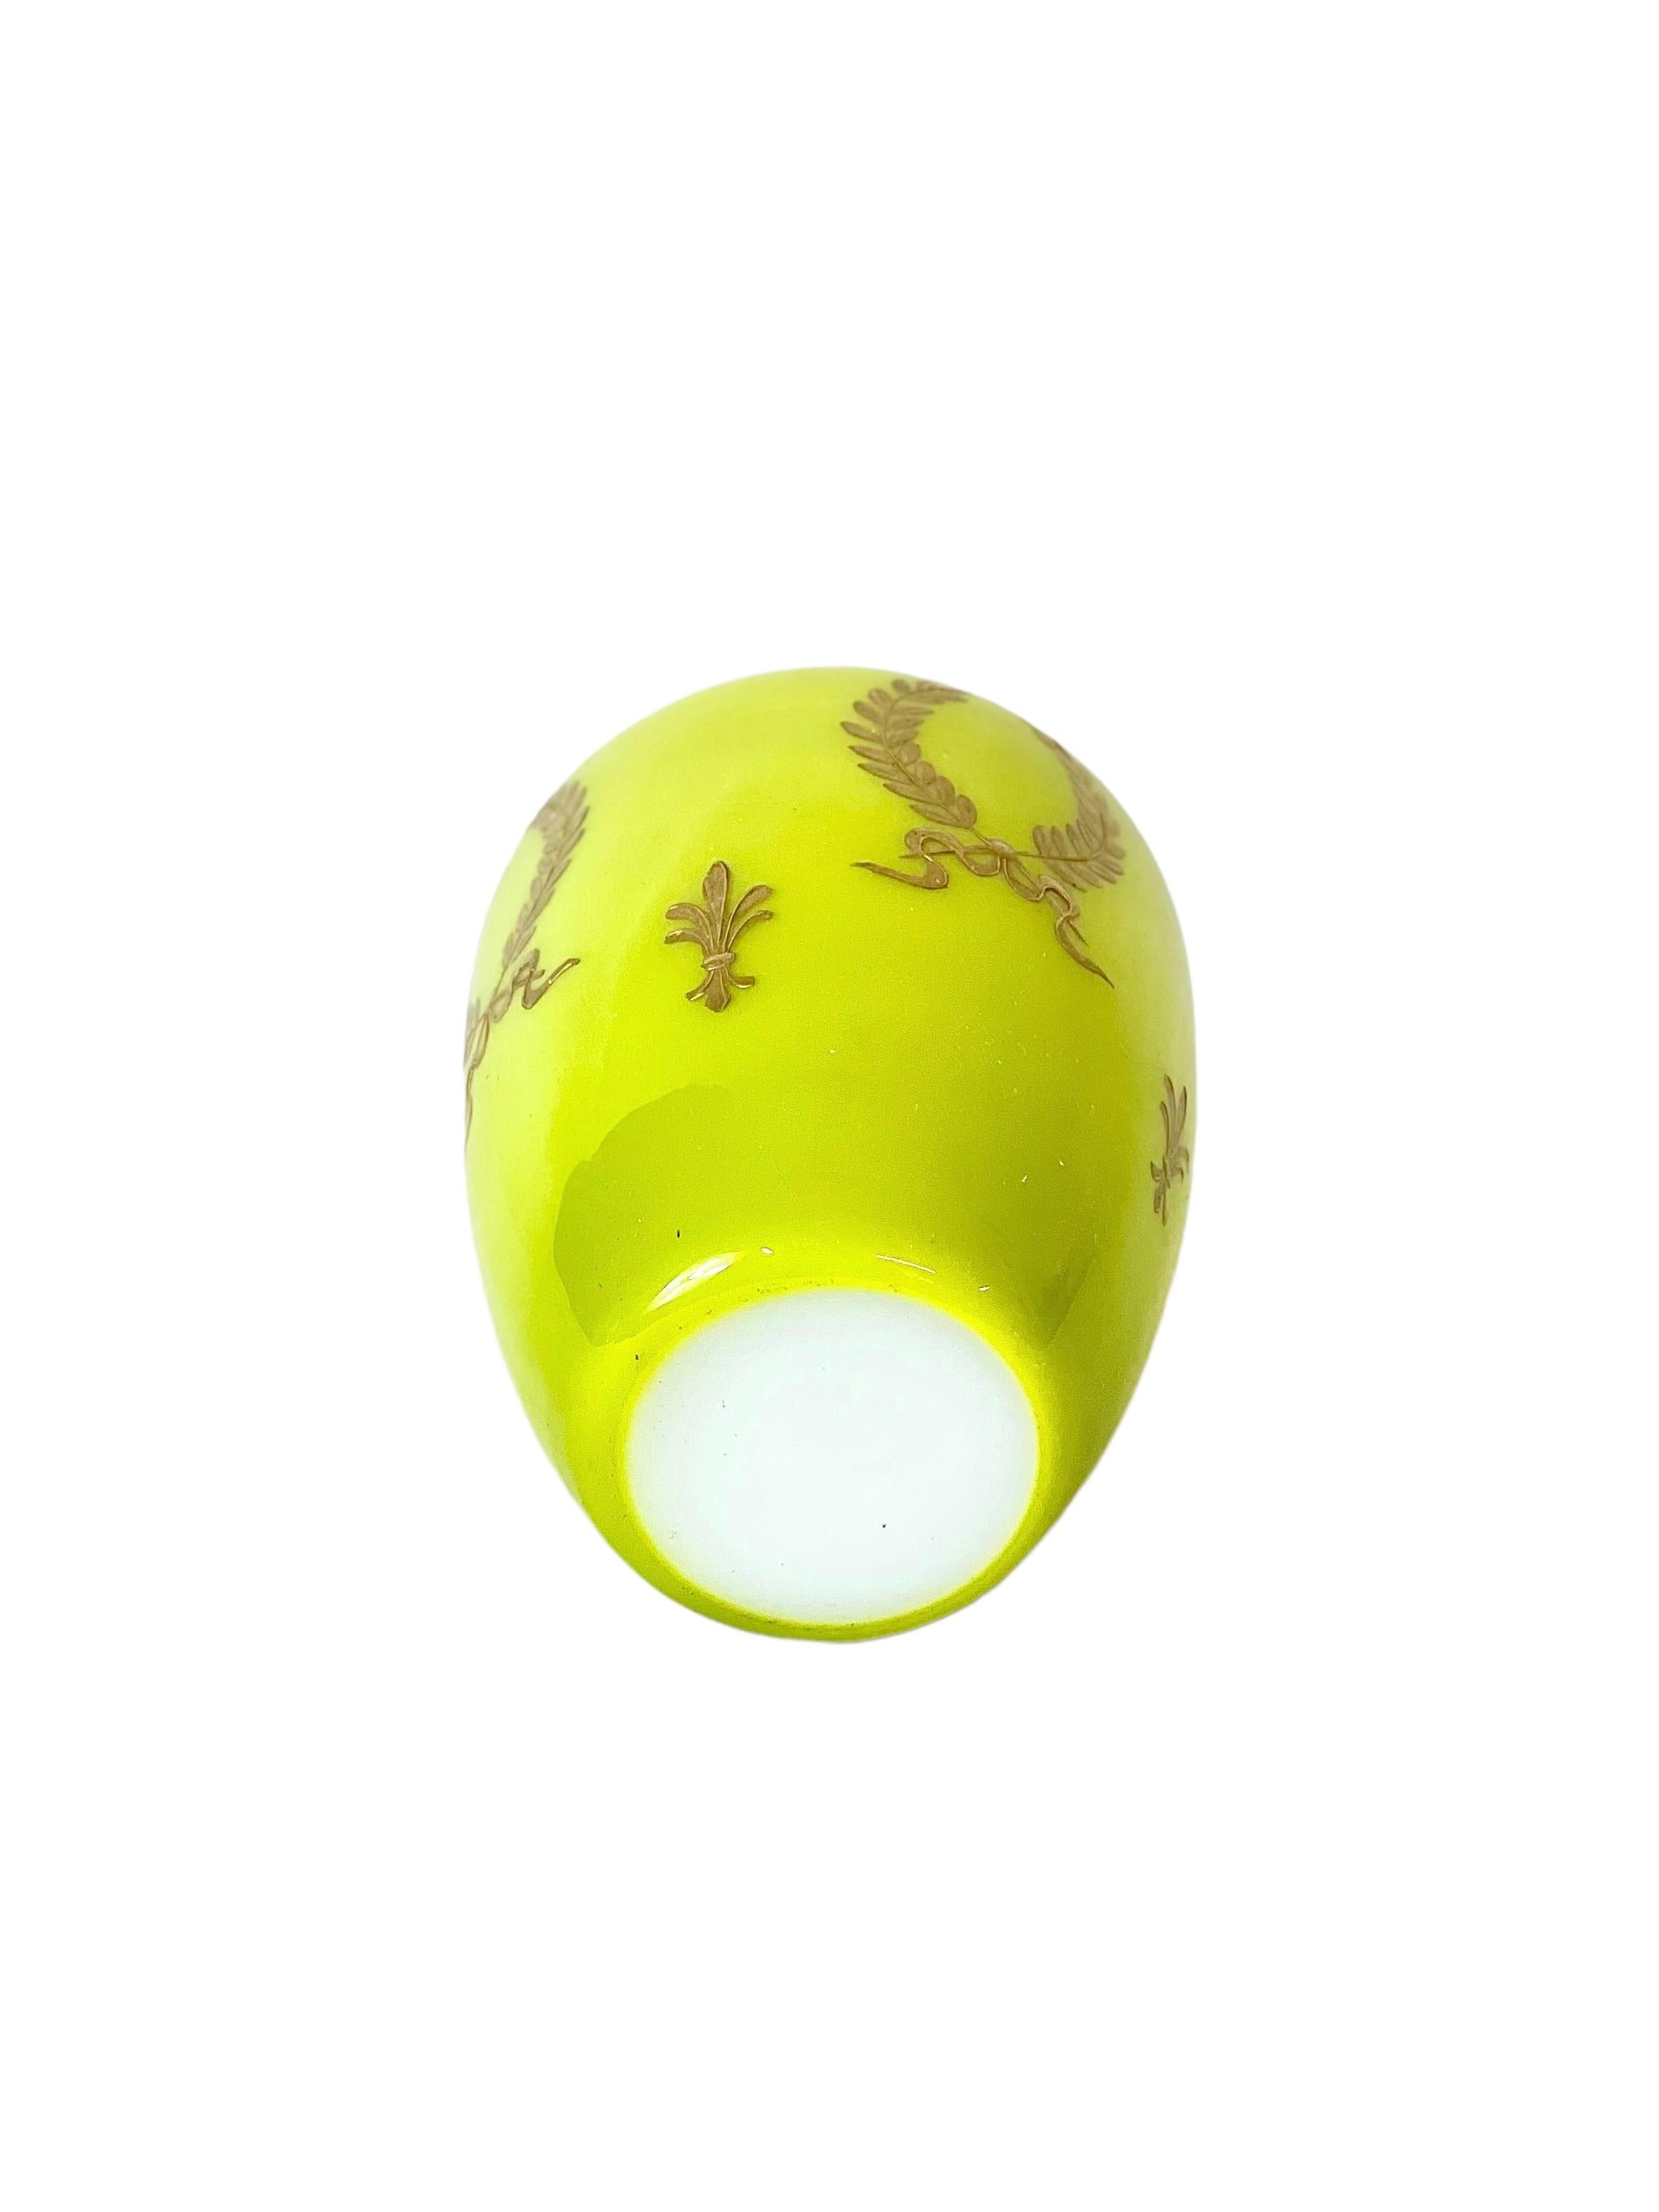 A charming, miniature opaline glass vase in a vibrant Chartreuse yellow, and decorated all around with stylised gilded laurel wreaths and fleurs-de-lys. This petite urn-shaped vase is pure white inside and has a delicately painted gilt rim to match